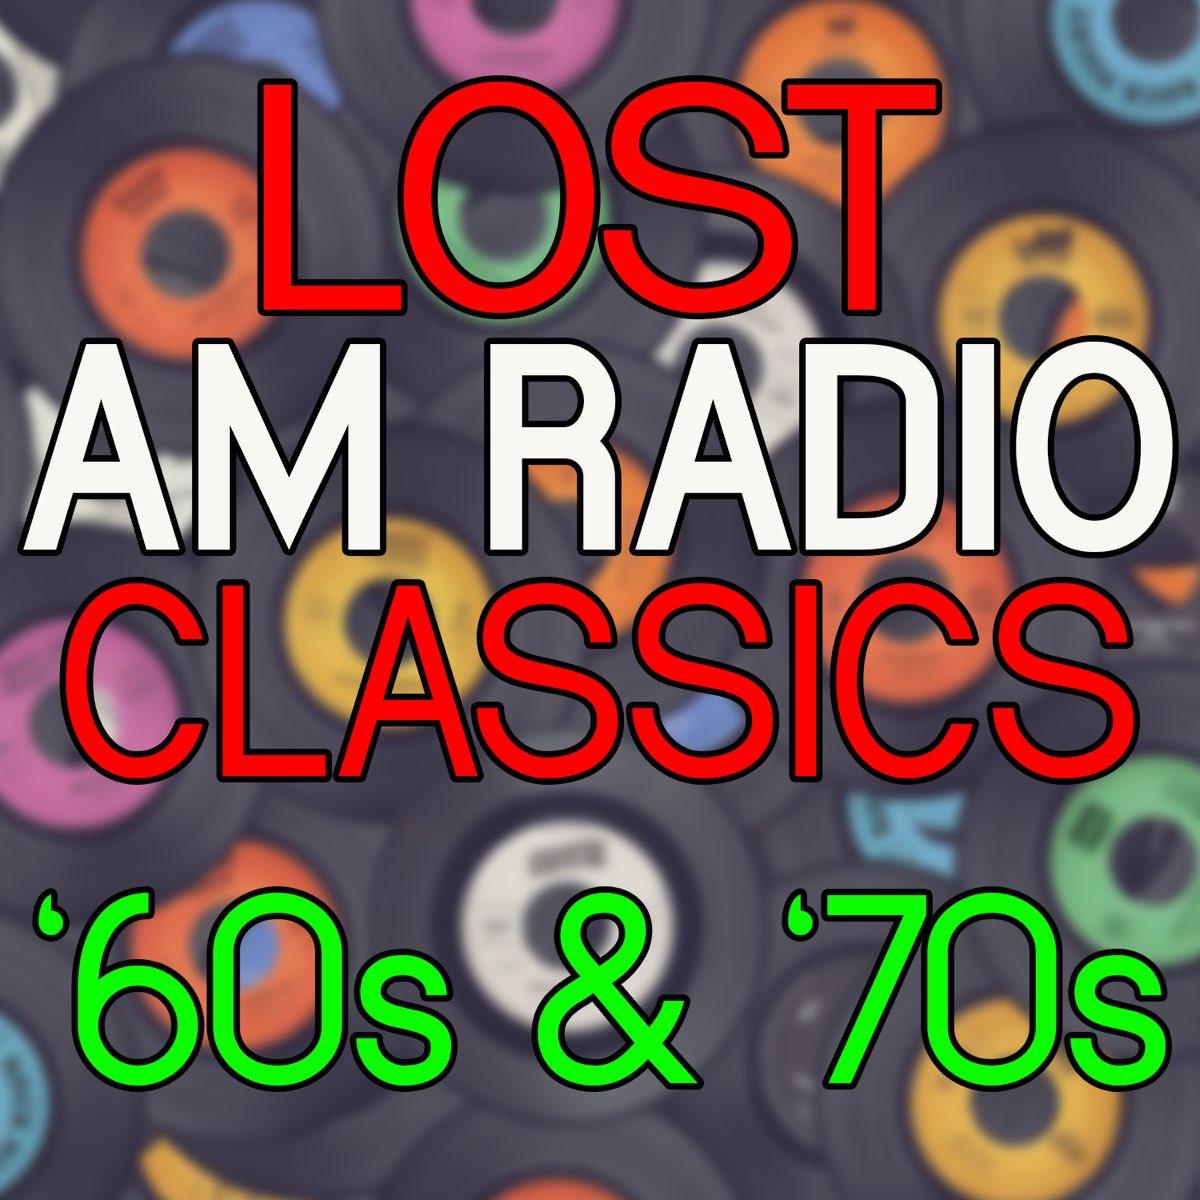 Lost AM Radio Classics '60s & '70s - Album by Various Artists - Apple Music